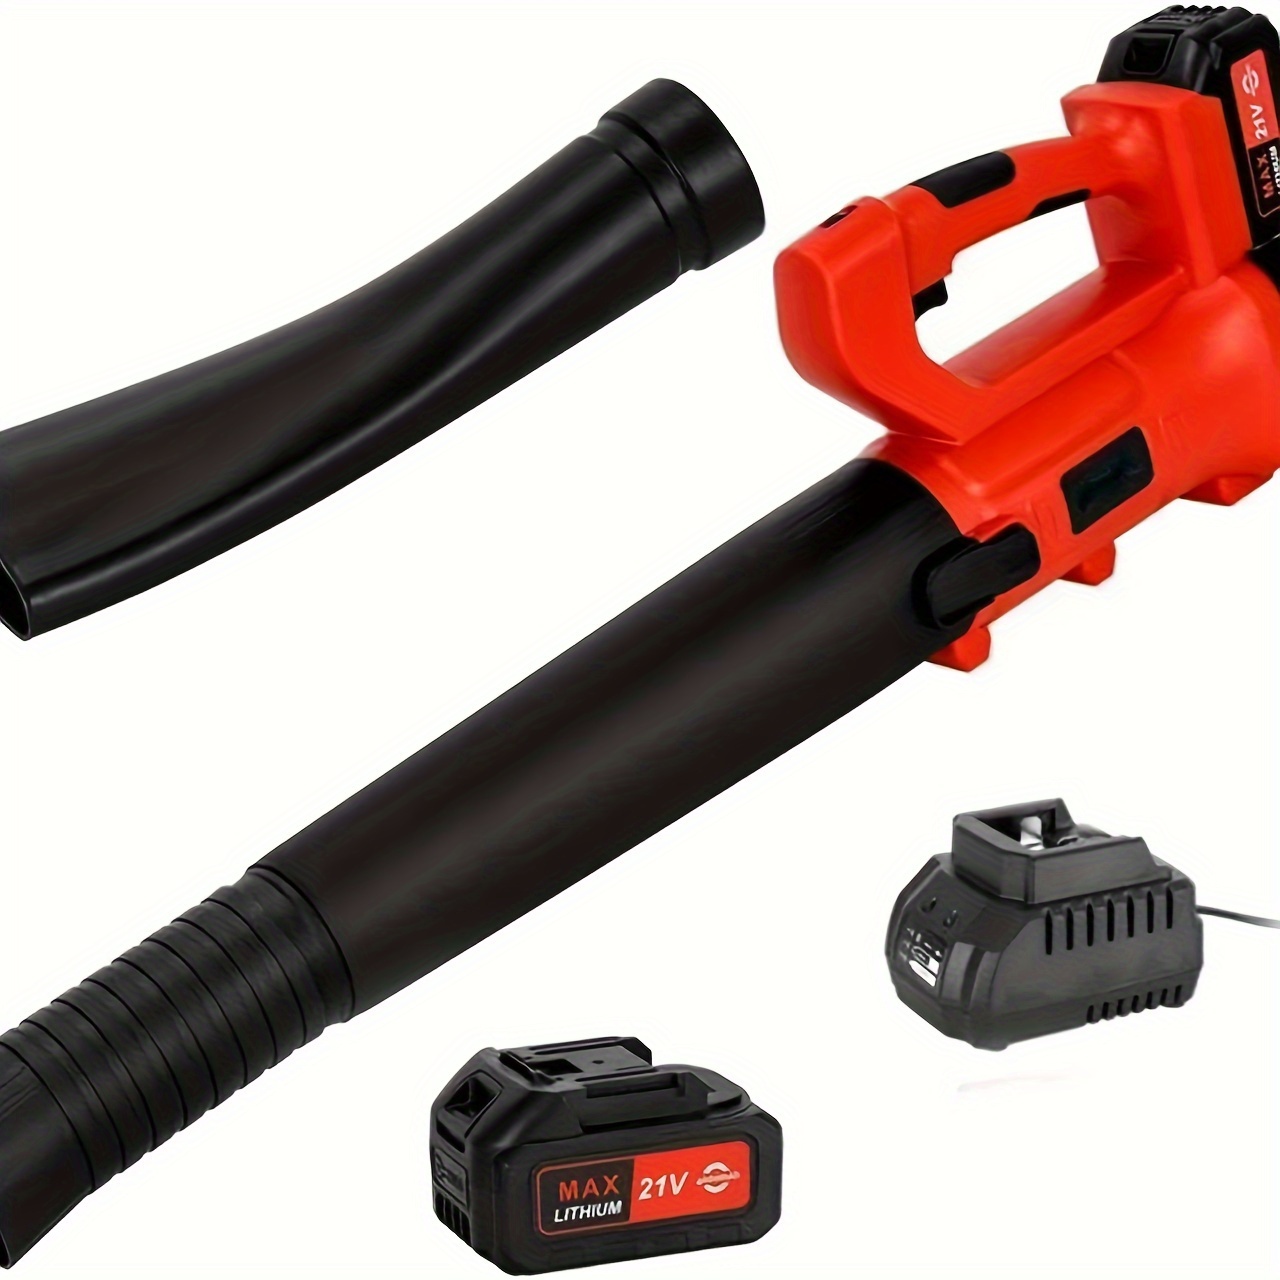 

Cordless Leaf Blower-powerful 6-speed Electric Handheld Leaf Blower With 4.0ah Battery & Charger, 400cfm And 150 Mph For Lawn Care, Snow Sweeping, And Surface Dust Cleaning